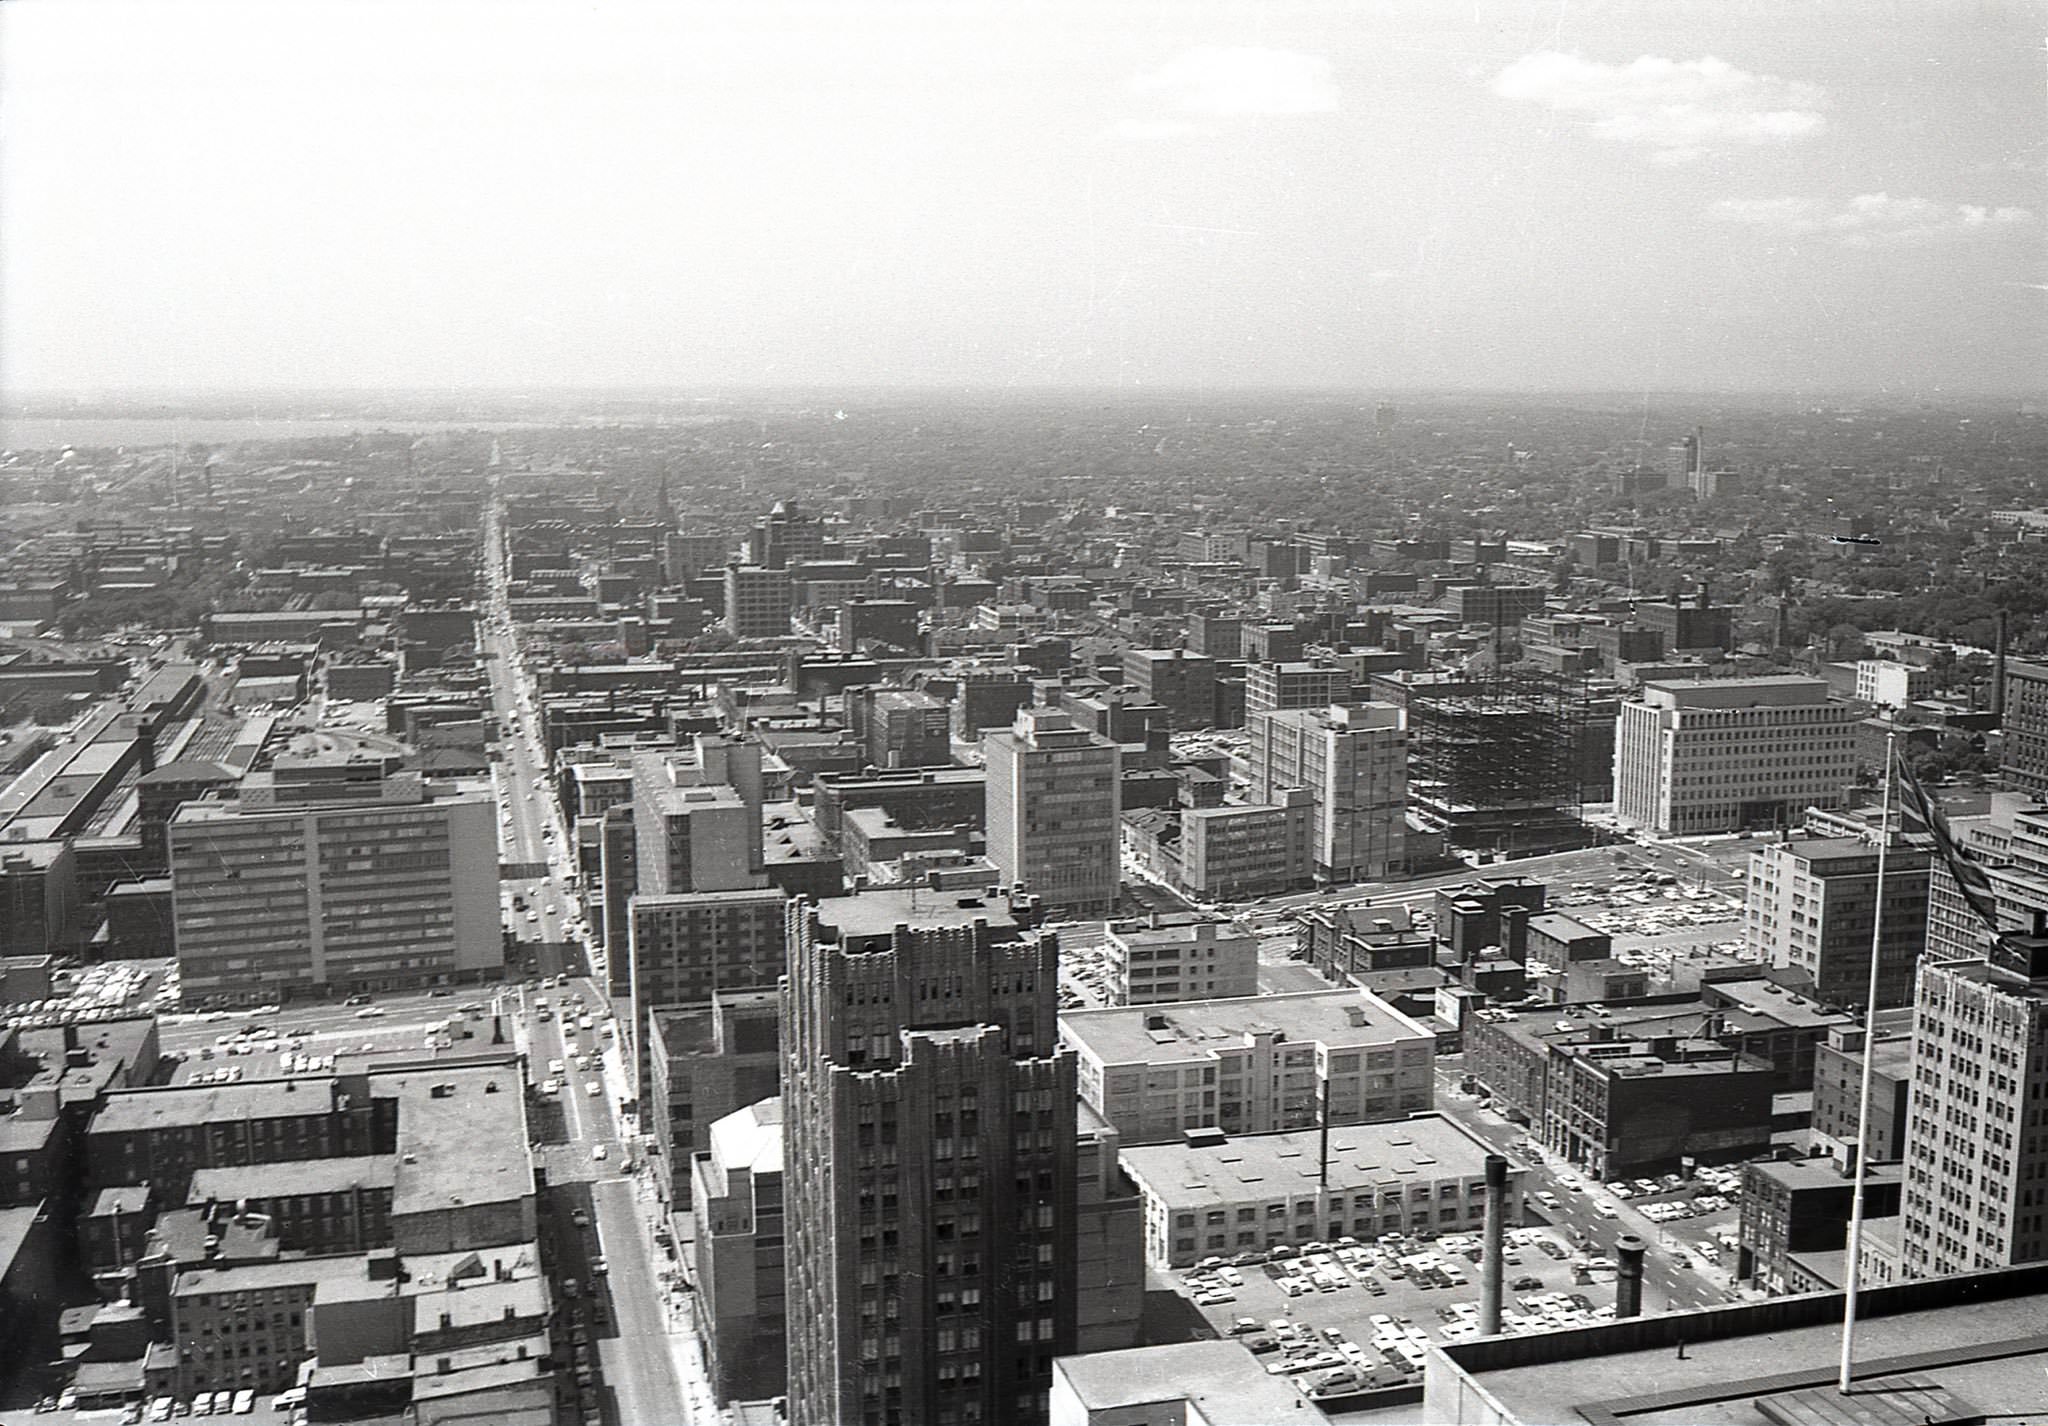 Back to the top of the Canadian Bank of Commerce Building, 1959